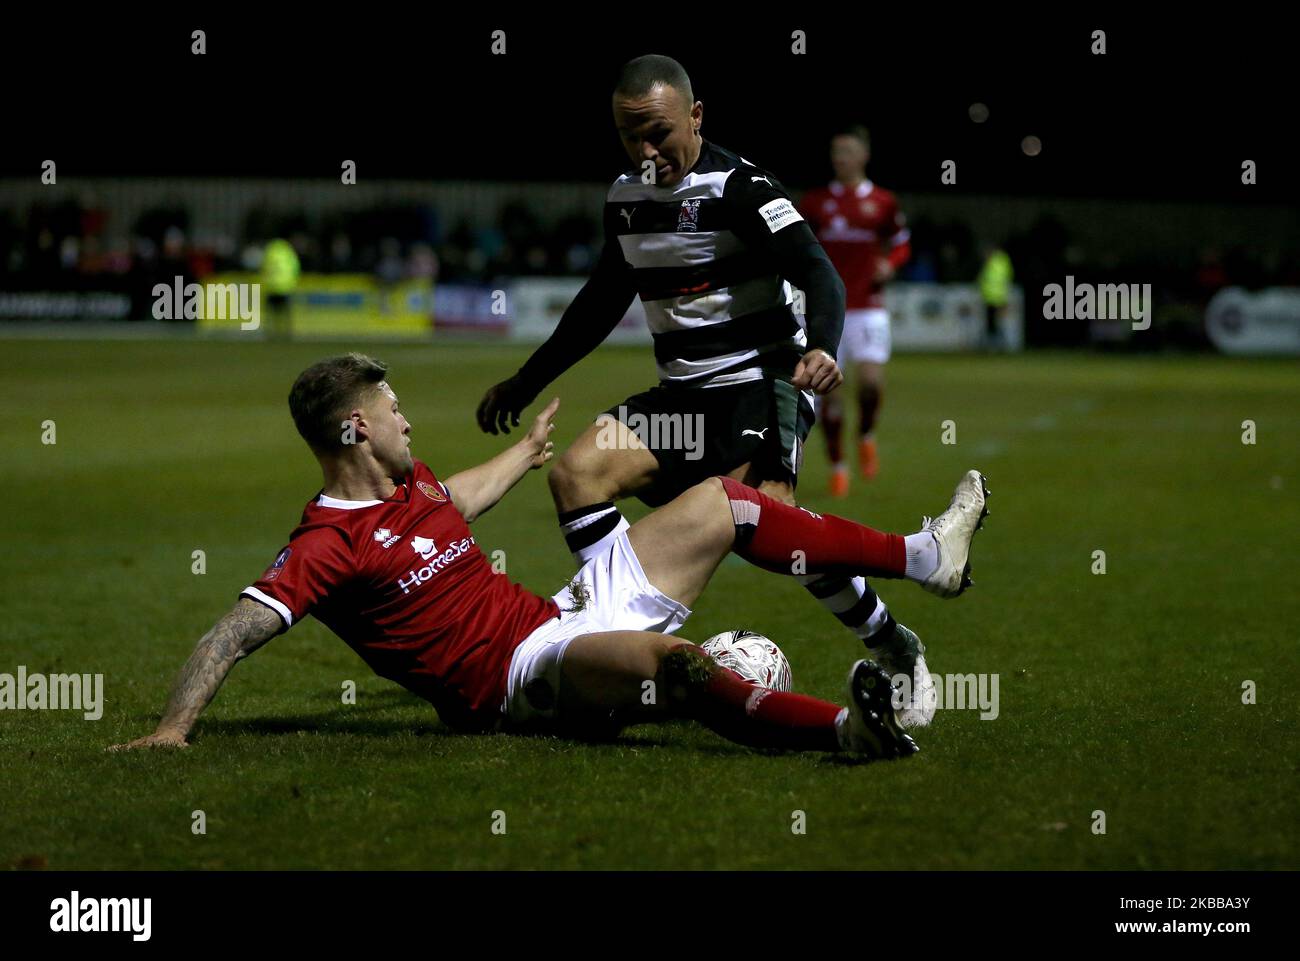 Stephen Thompson of Darlington and James Clarke of Walsall during the FA Cup match between Darlington and Walsall at Blackwell Meadows, Darlington on Wednesday 20th November 2019. (Photo by Chris Booth/MI News/NurPhoto) Stock Photo